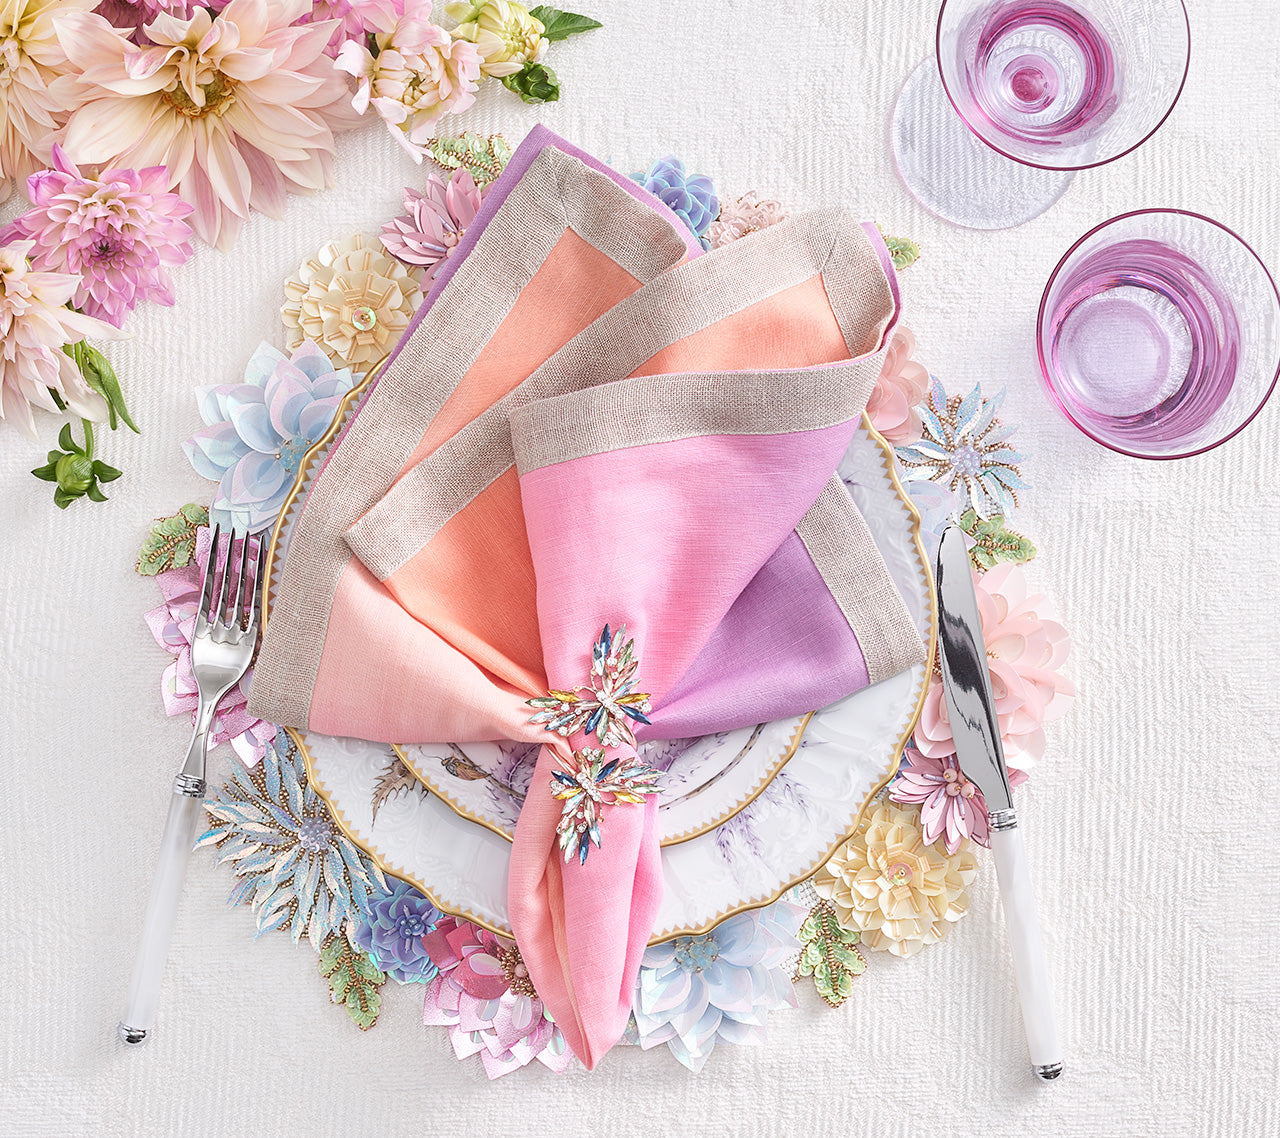 Kim Seybert Luxury Dip Dye Napkin in sorbet on a table setting with a jeweled napkin ring